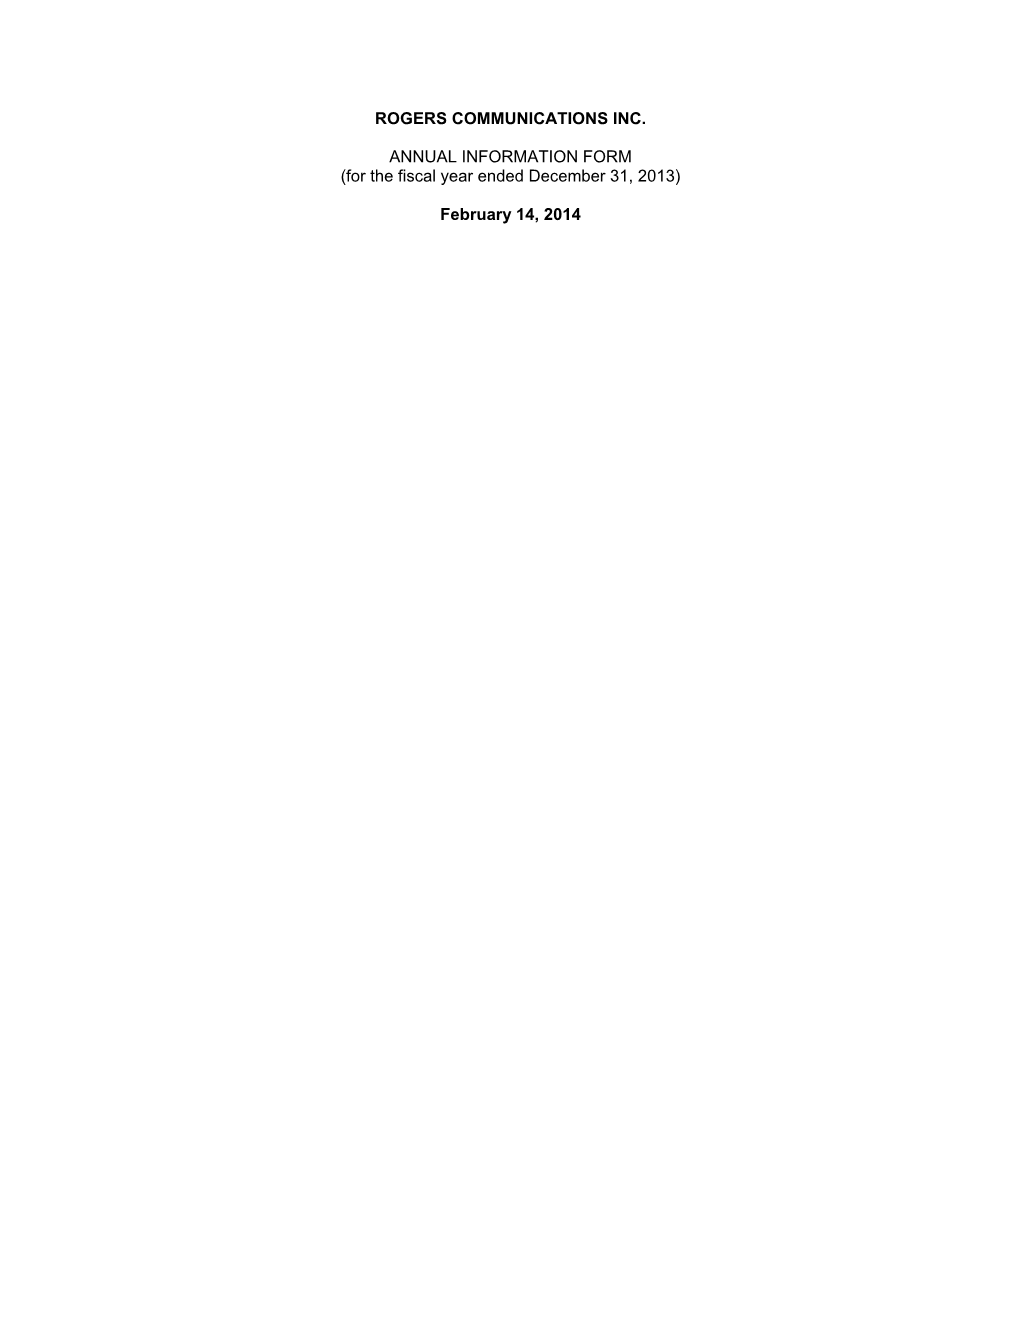 ROGERS COMMUNICATIONS INC. ANNUAL INFORMATION FORM (For